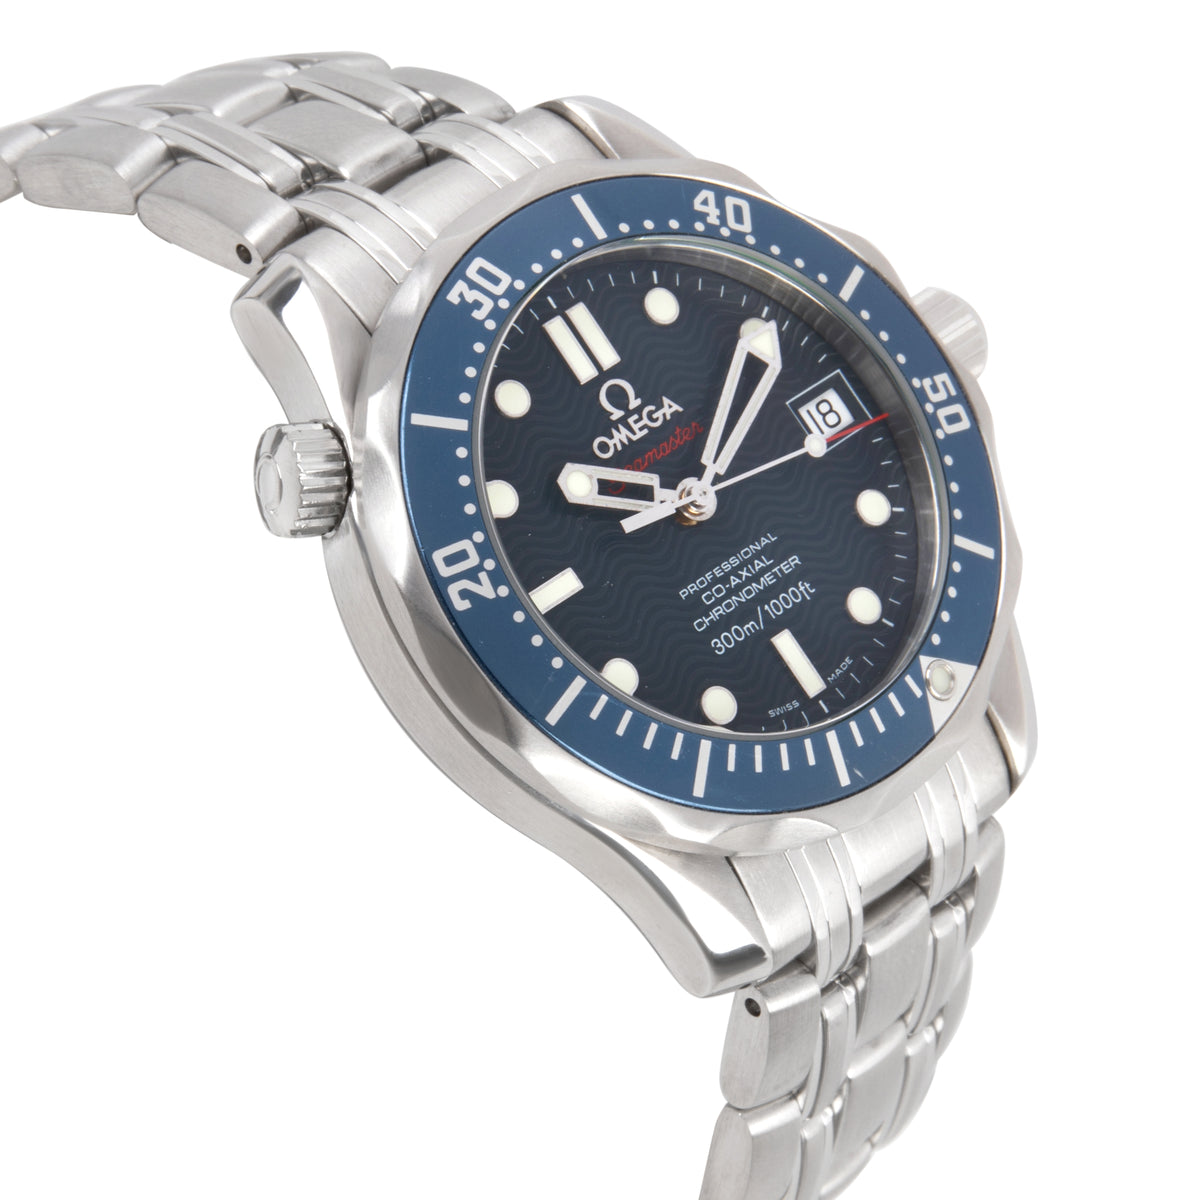 Omega Seamaster Diver 300M 2222.80.00 Men's Watch in  Stainless Steel